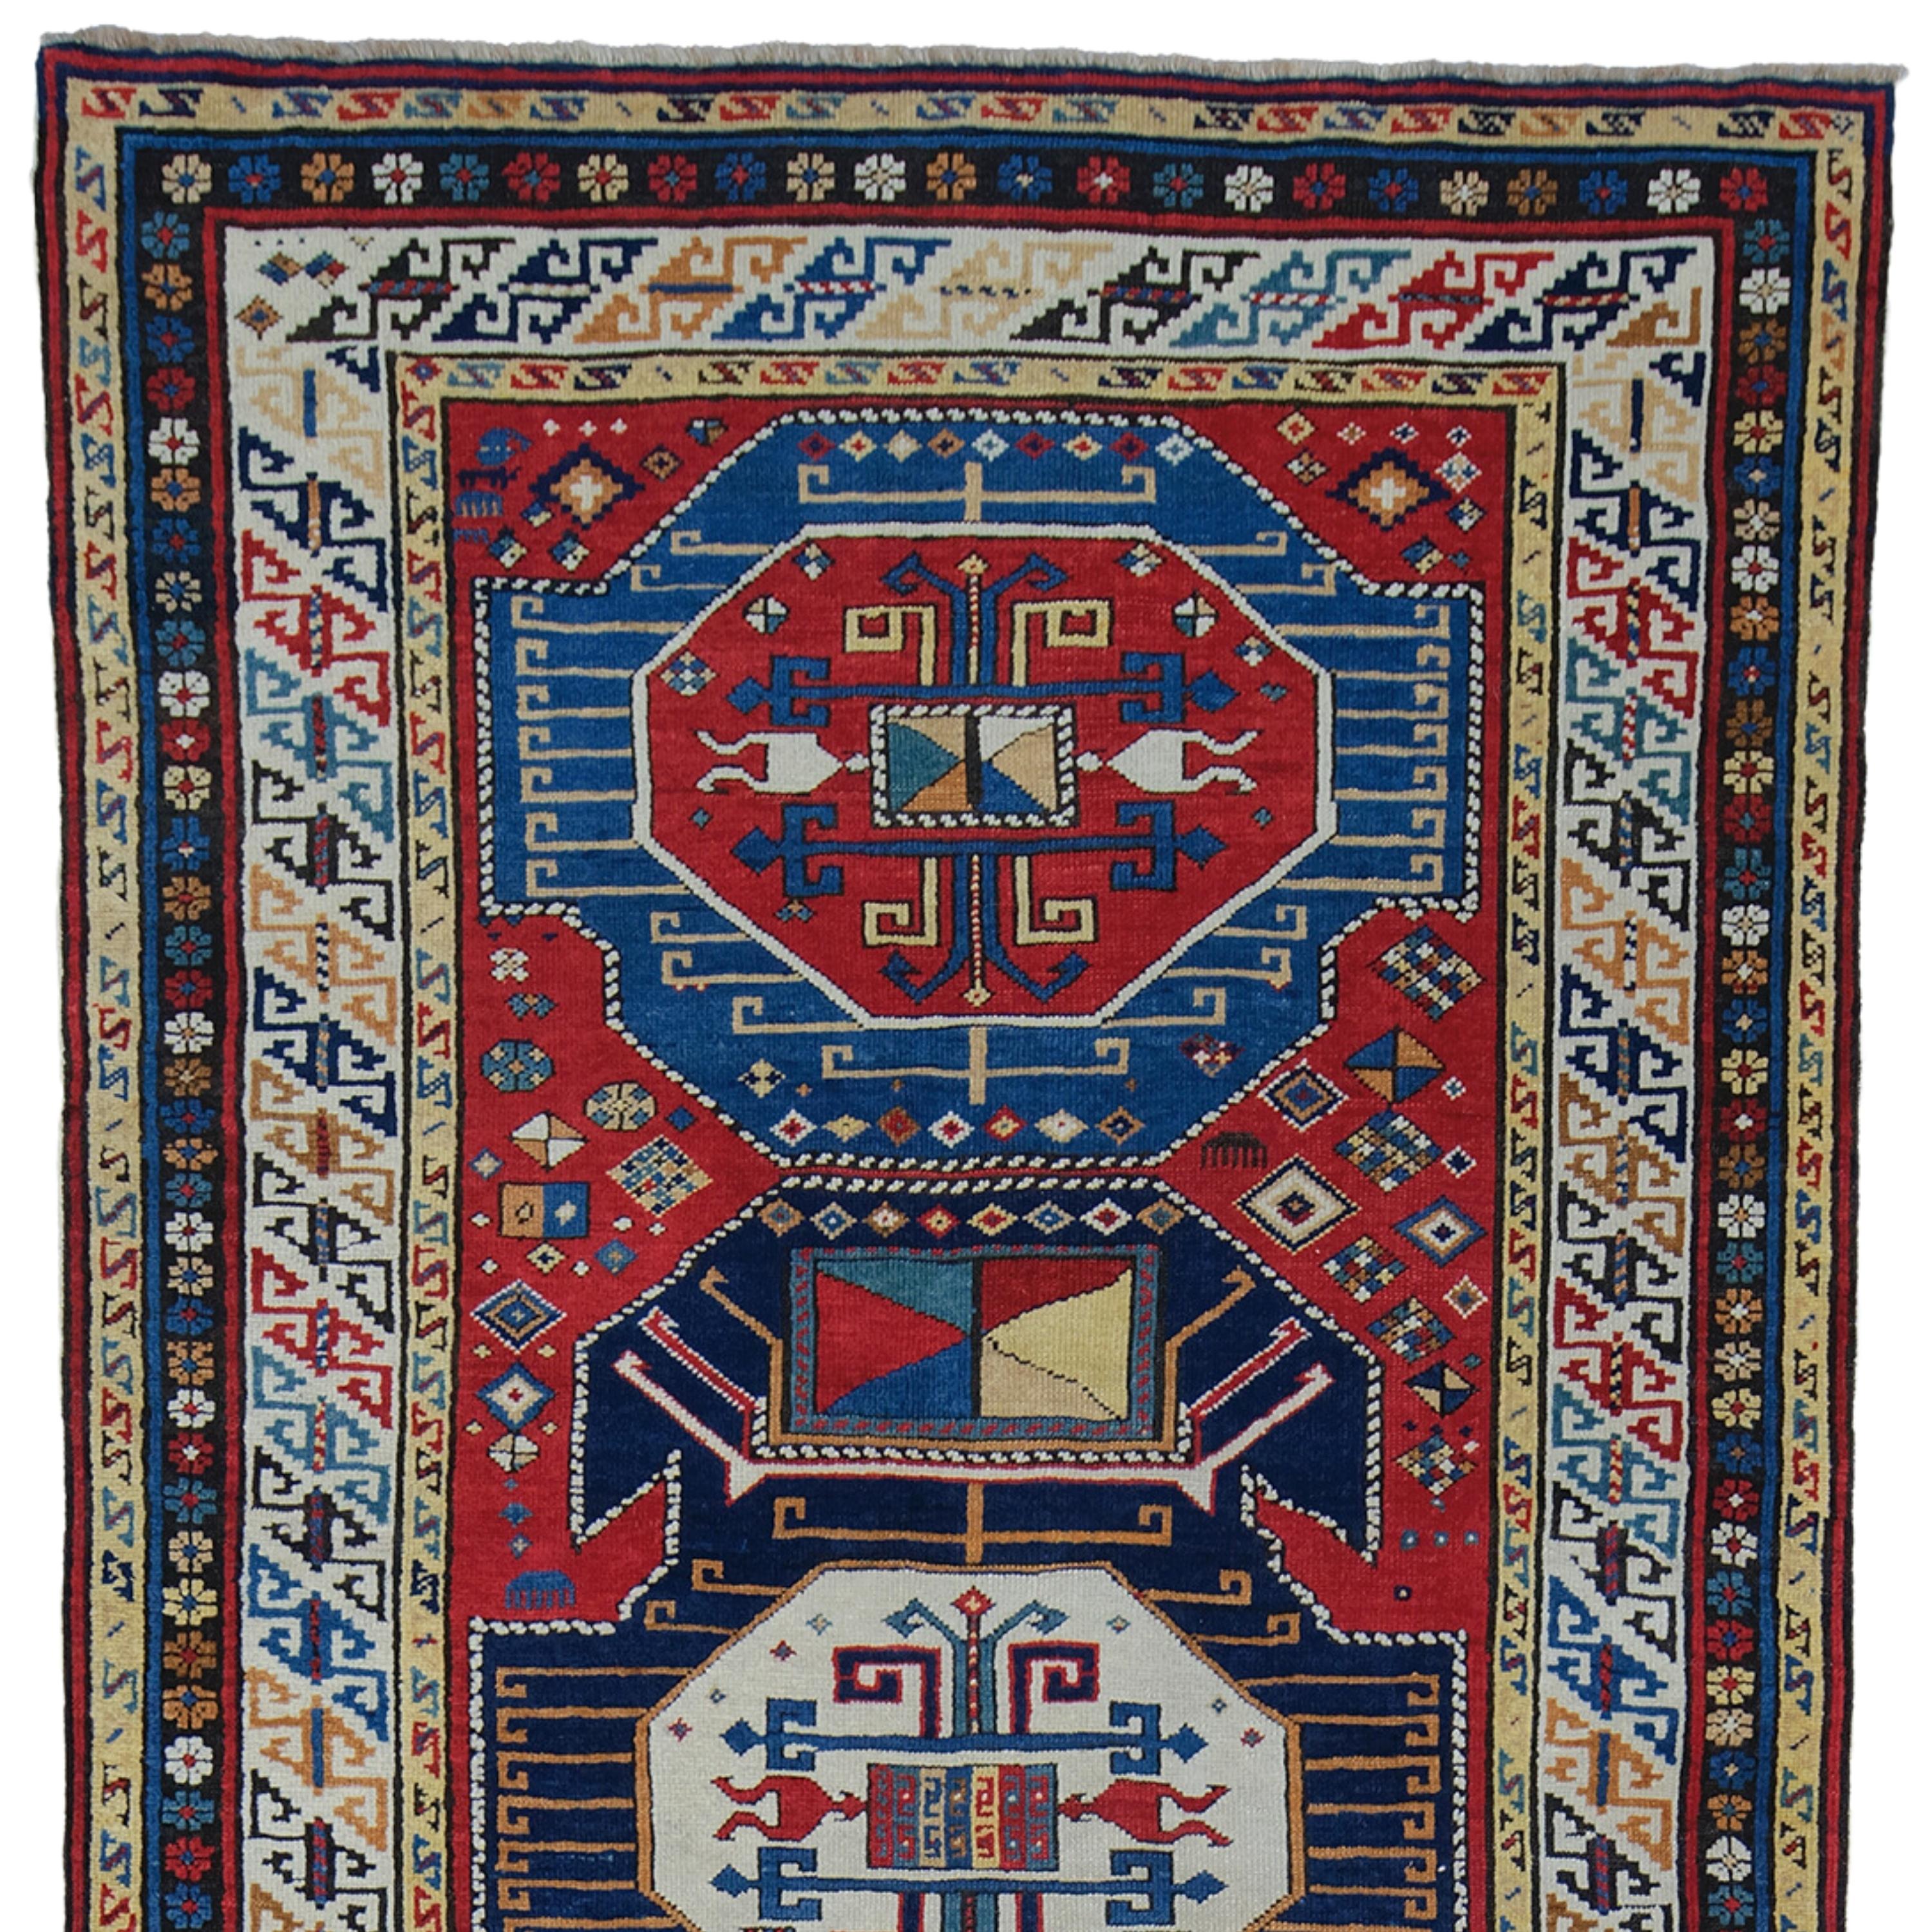 A Unique Work of Art: 19th Century Colorful Geometric Tribal Appearance Caucasian Shirvan Runner

If you want to add an authentic and artistic touch to your home, this antique rug is for you. This runner is a Colorful Geometric Tribal Appearance